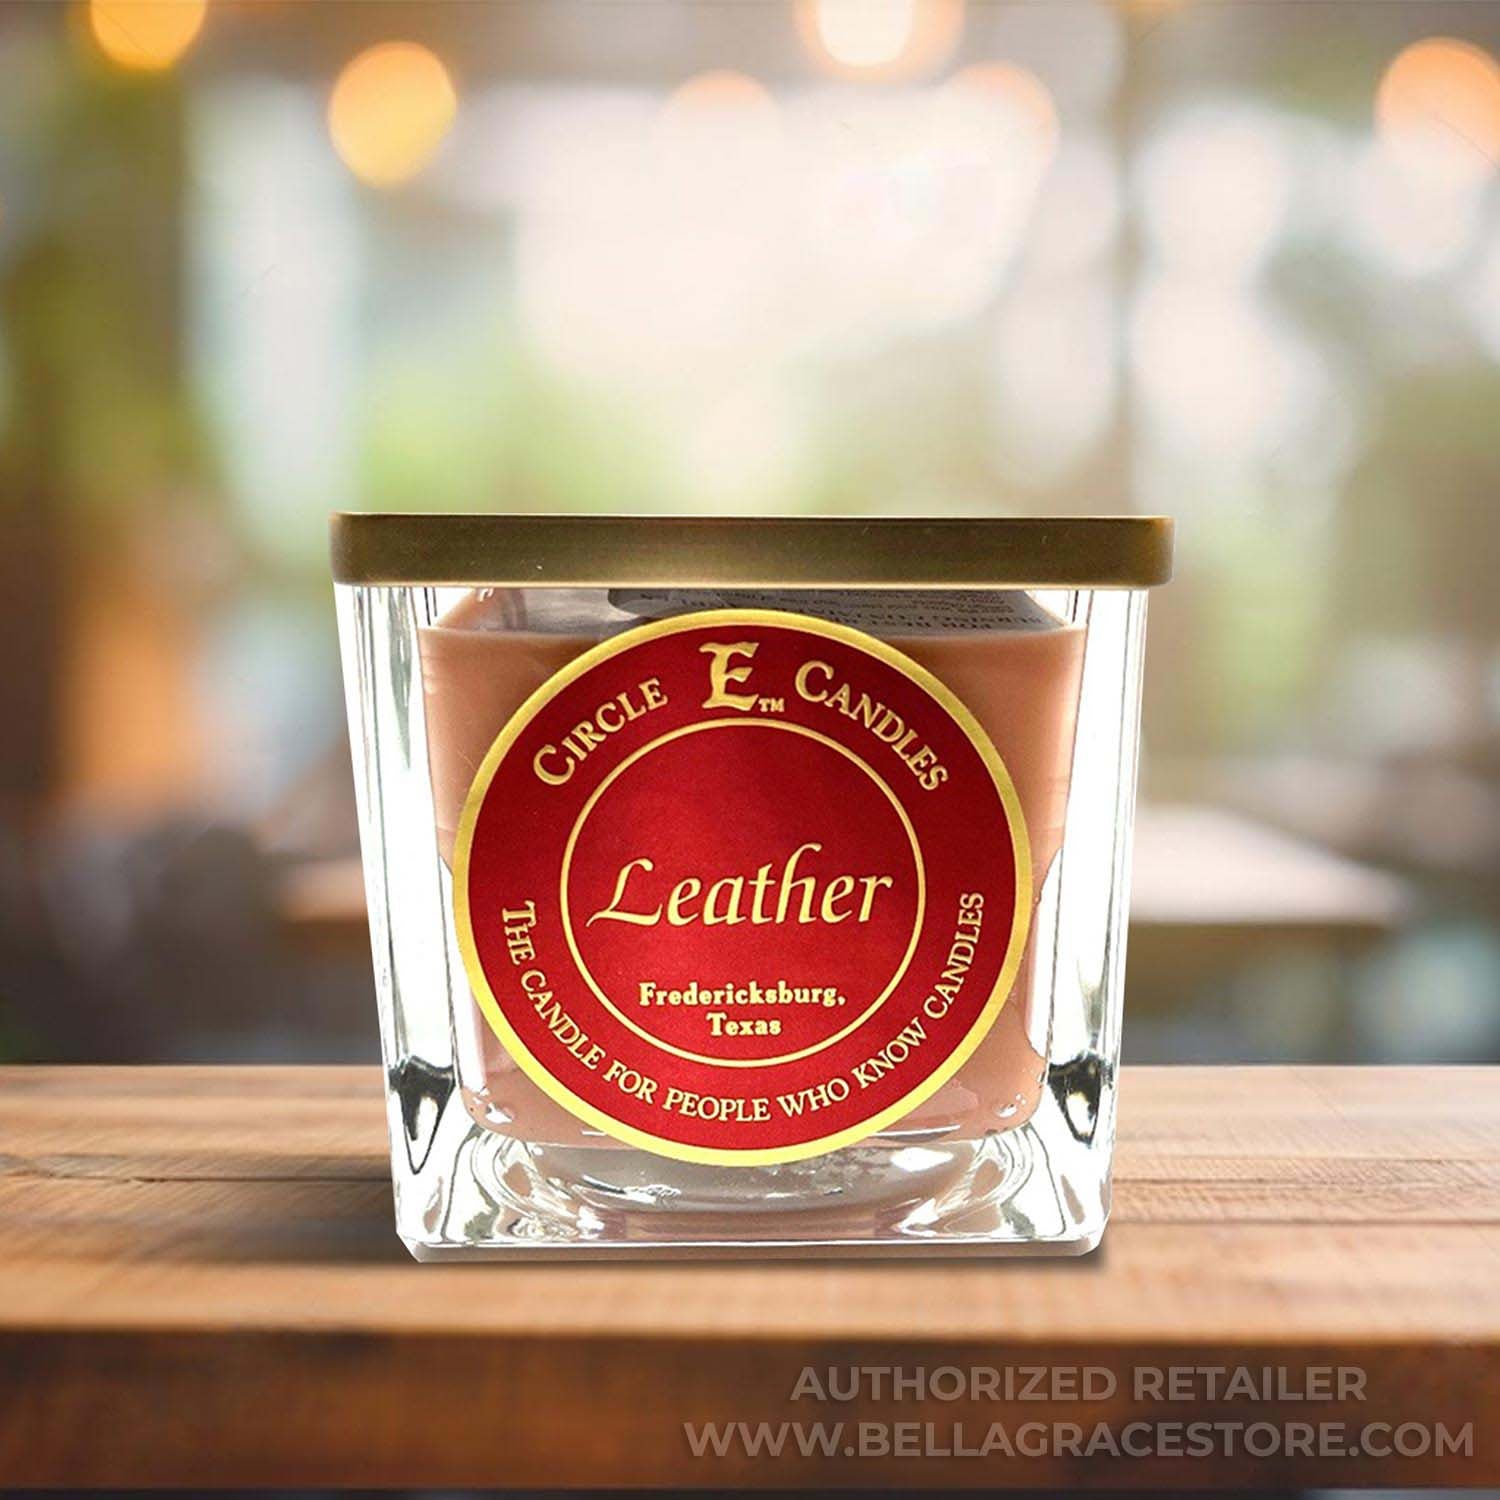 Circle E Candles, Leather Scent, Medium Size Jar Candle, 22oz, 2 Wicks